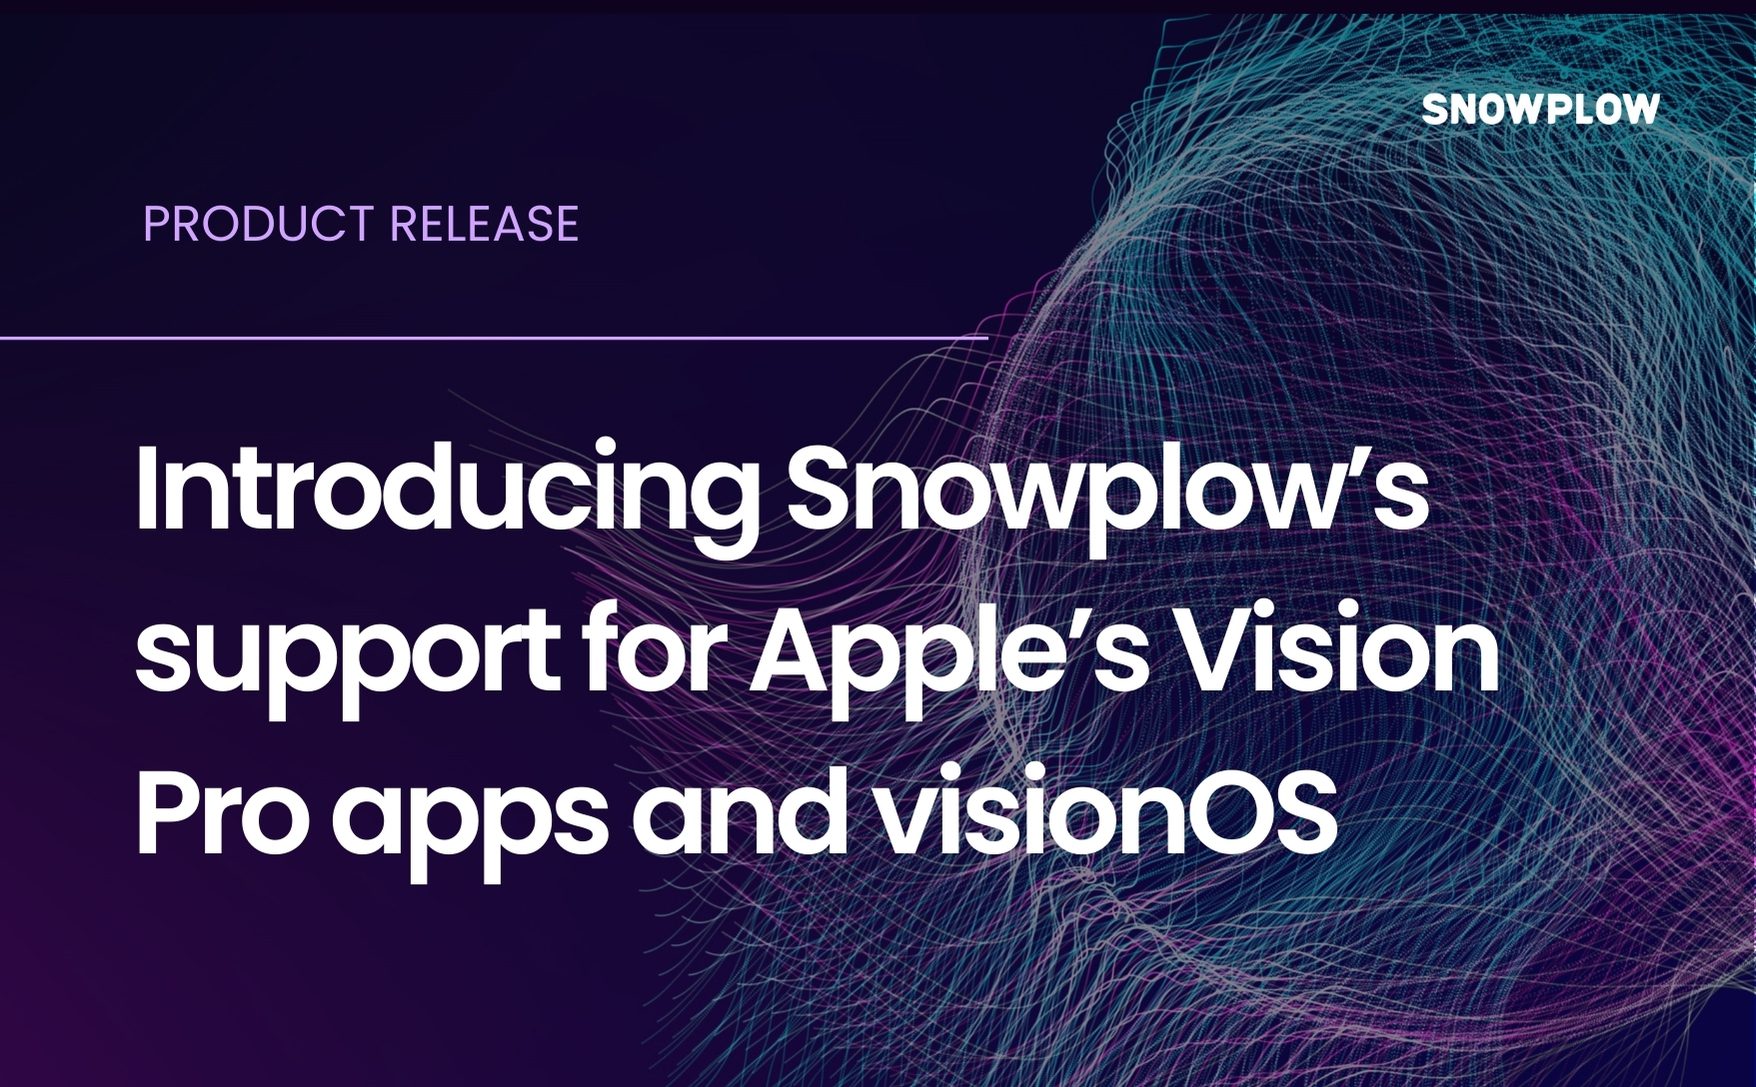 Apple’s Vision Pro apps and visionOS Snowplow Support